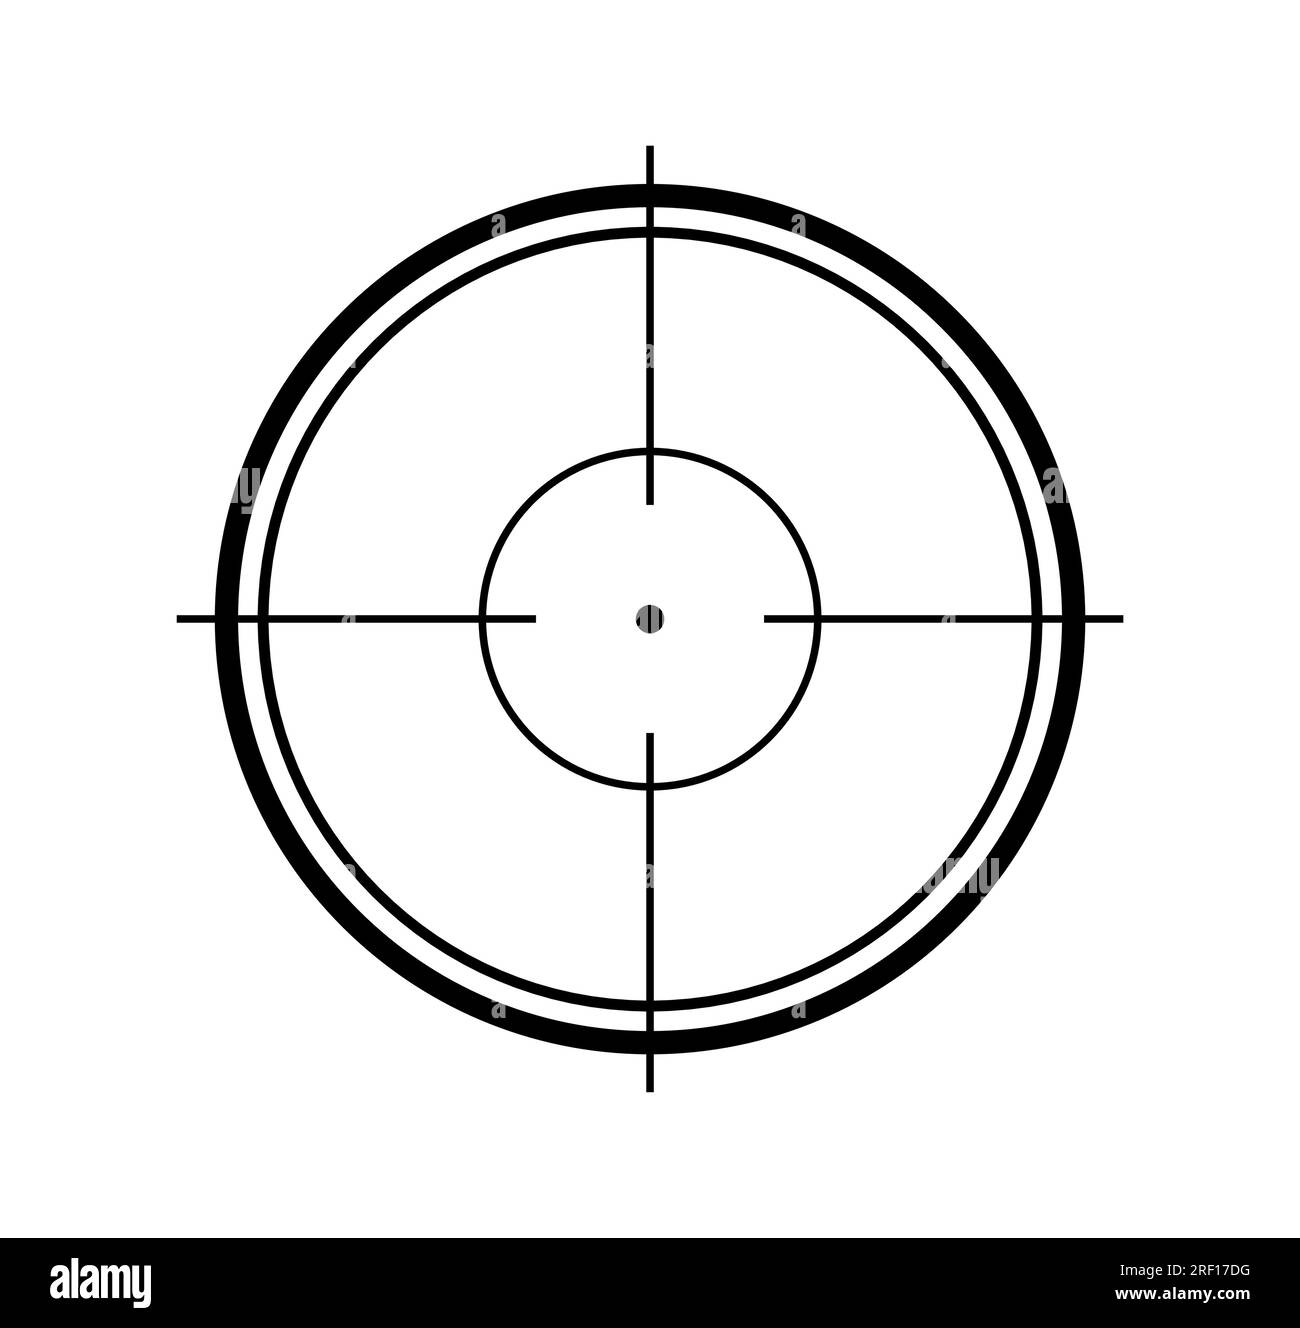 Sniper and hunter crosshair aiming and targeting symbol focusing and hunting vector illustration icon Stock Vector